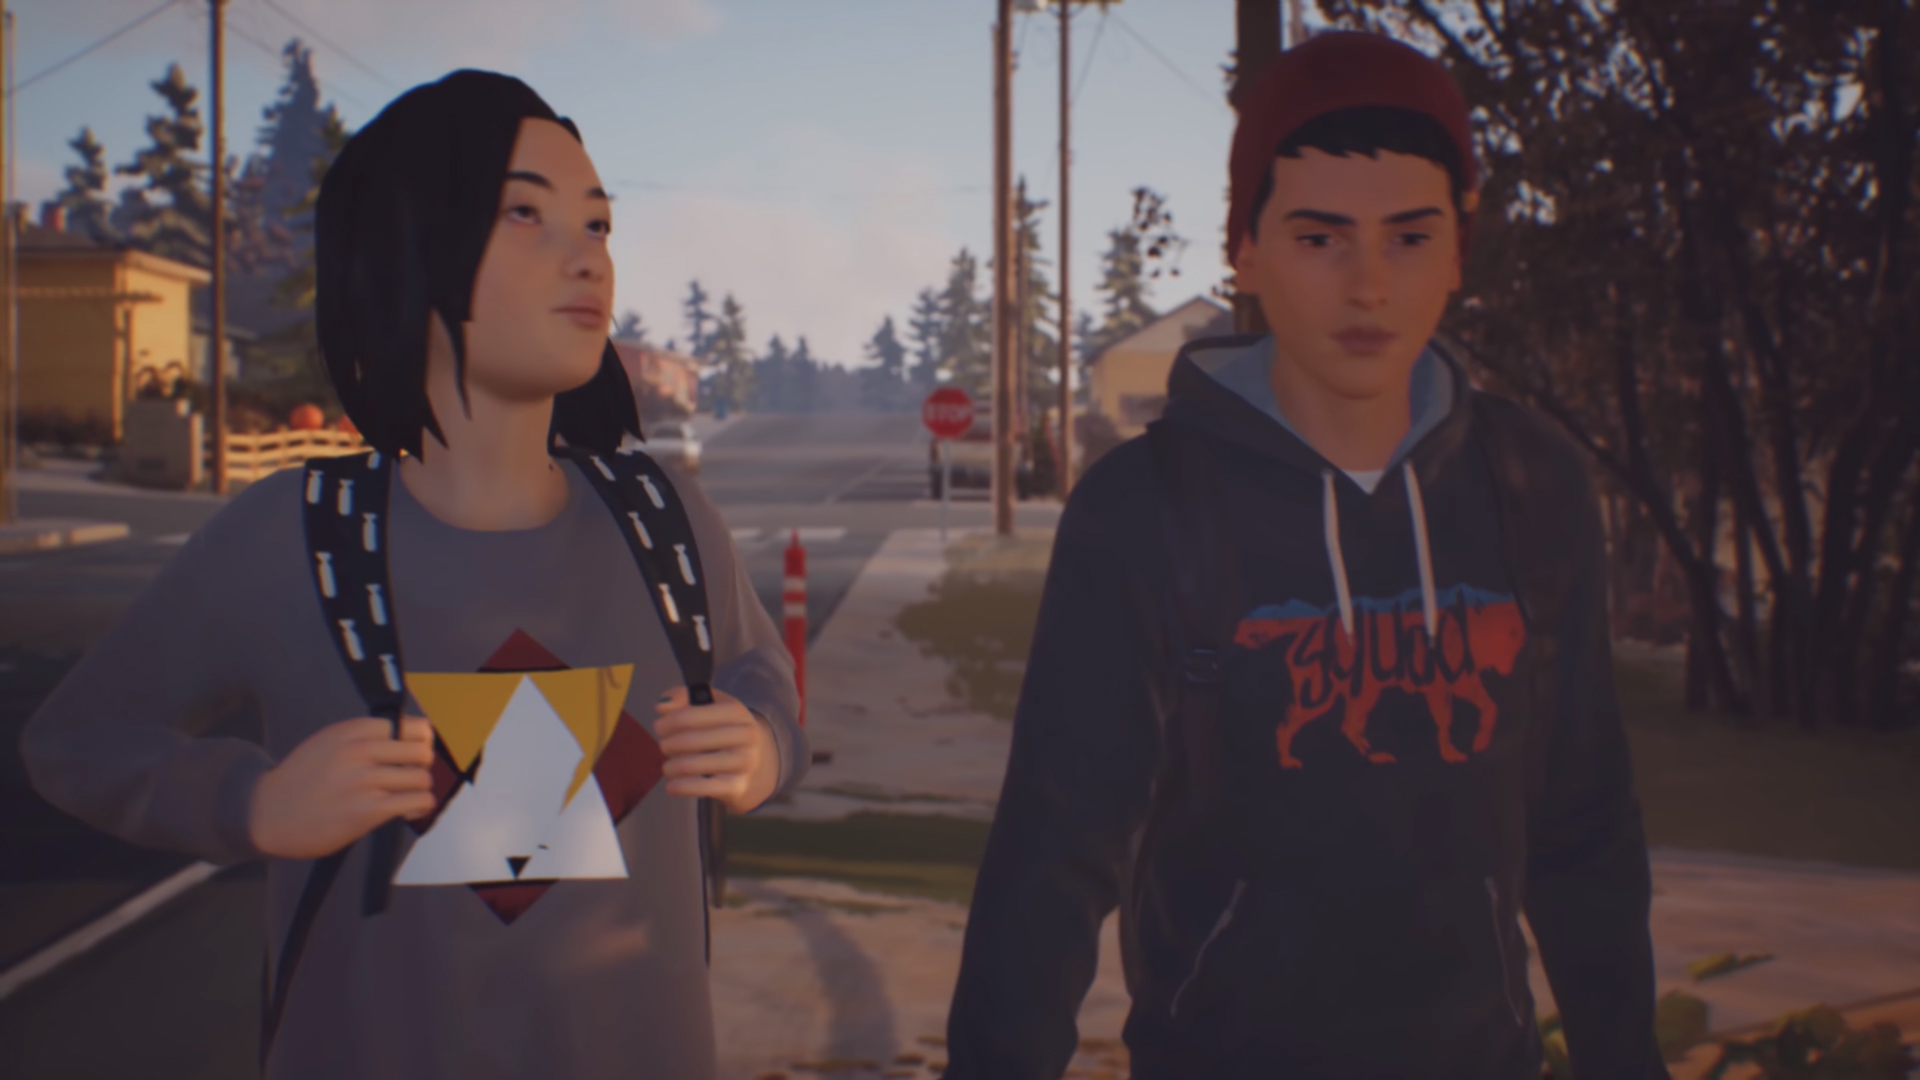 life-is-strange-2-starts-off-in-a-heavy-place-with-some-new-gameplay